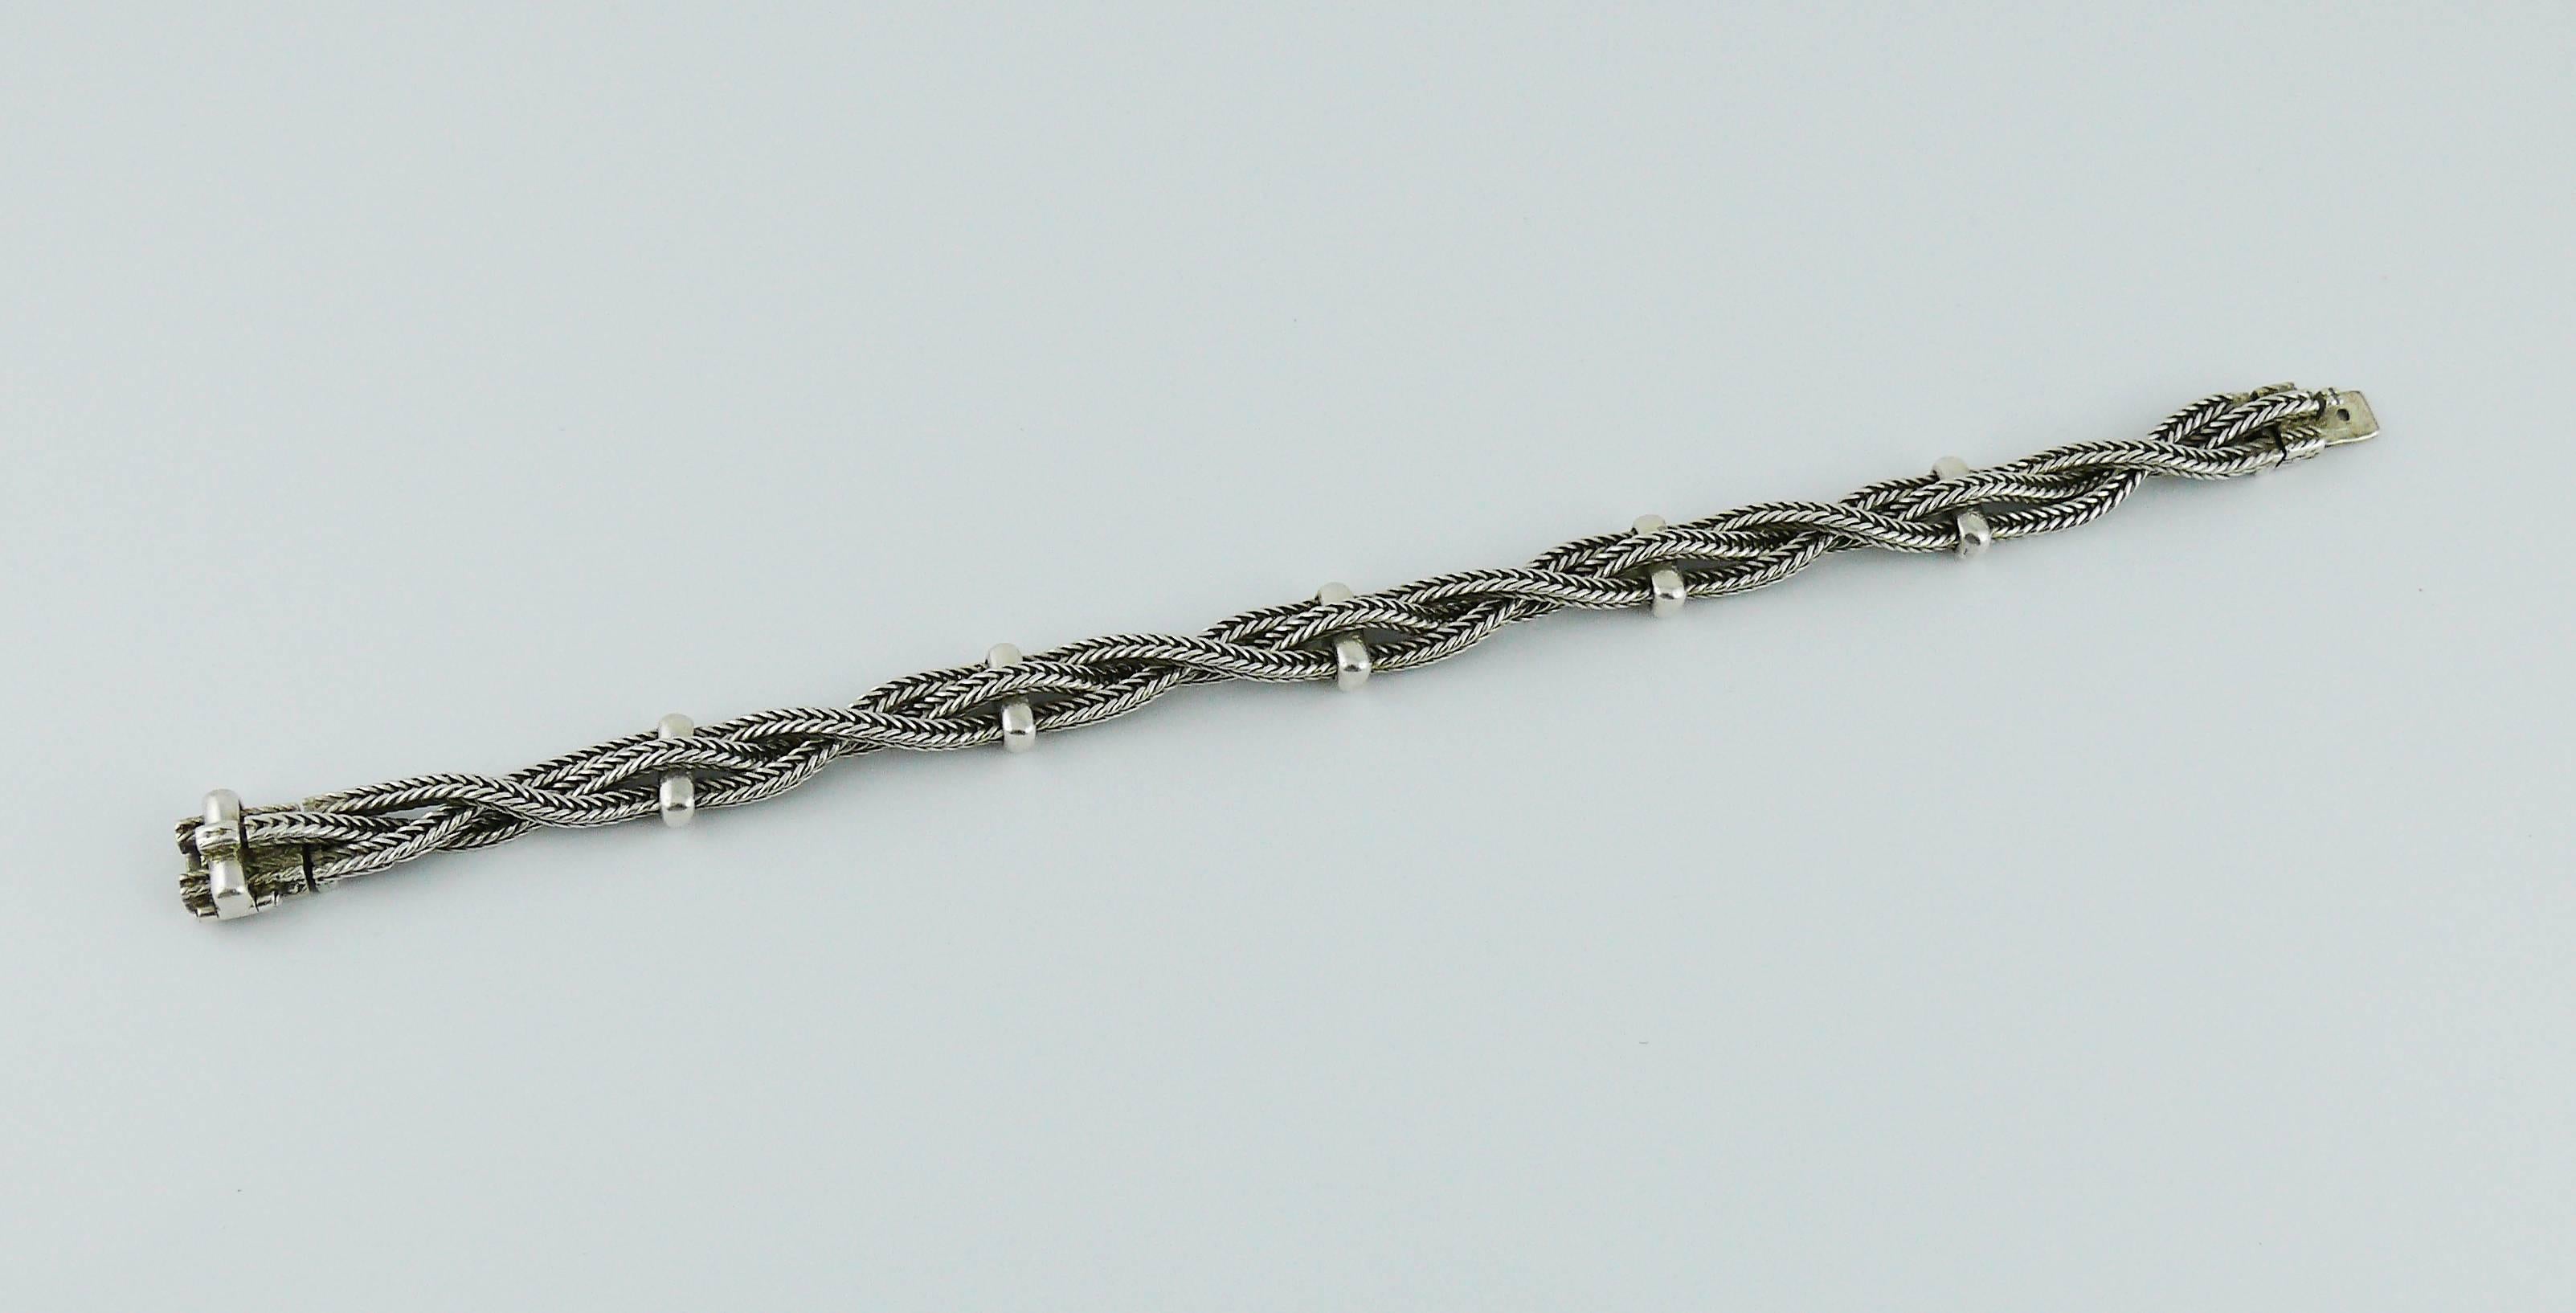 HERMES vintage rare sterling silver bracelet featuring a gorgeous intertwined rope design.

Embossed HERMES.
French silver hallmark 